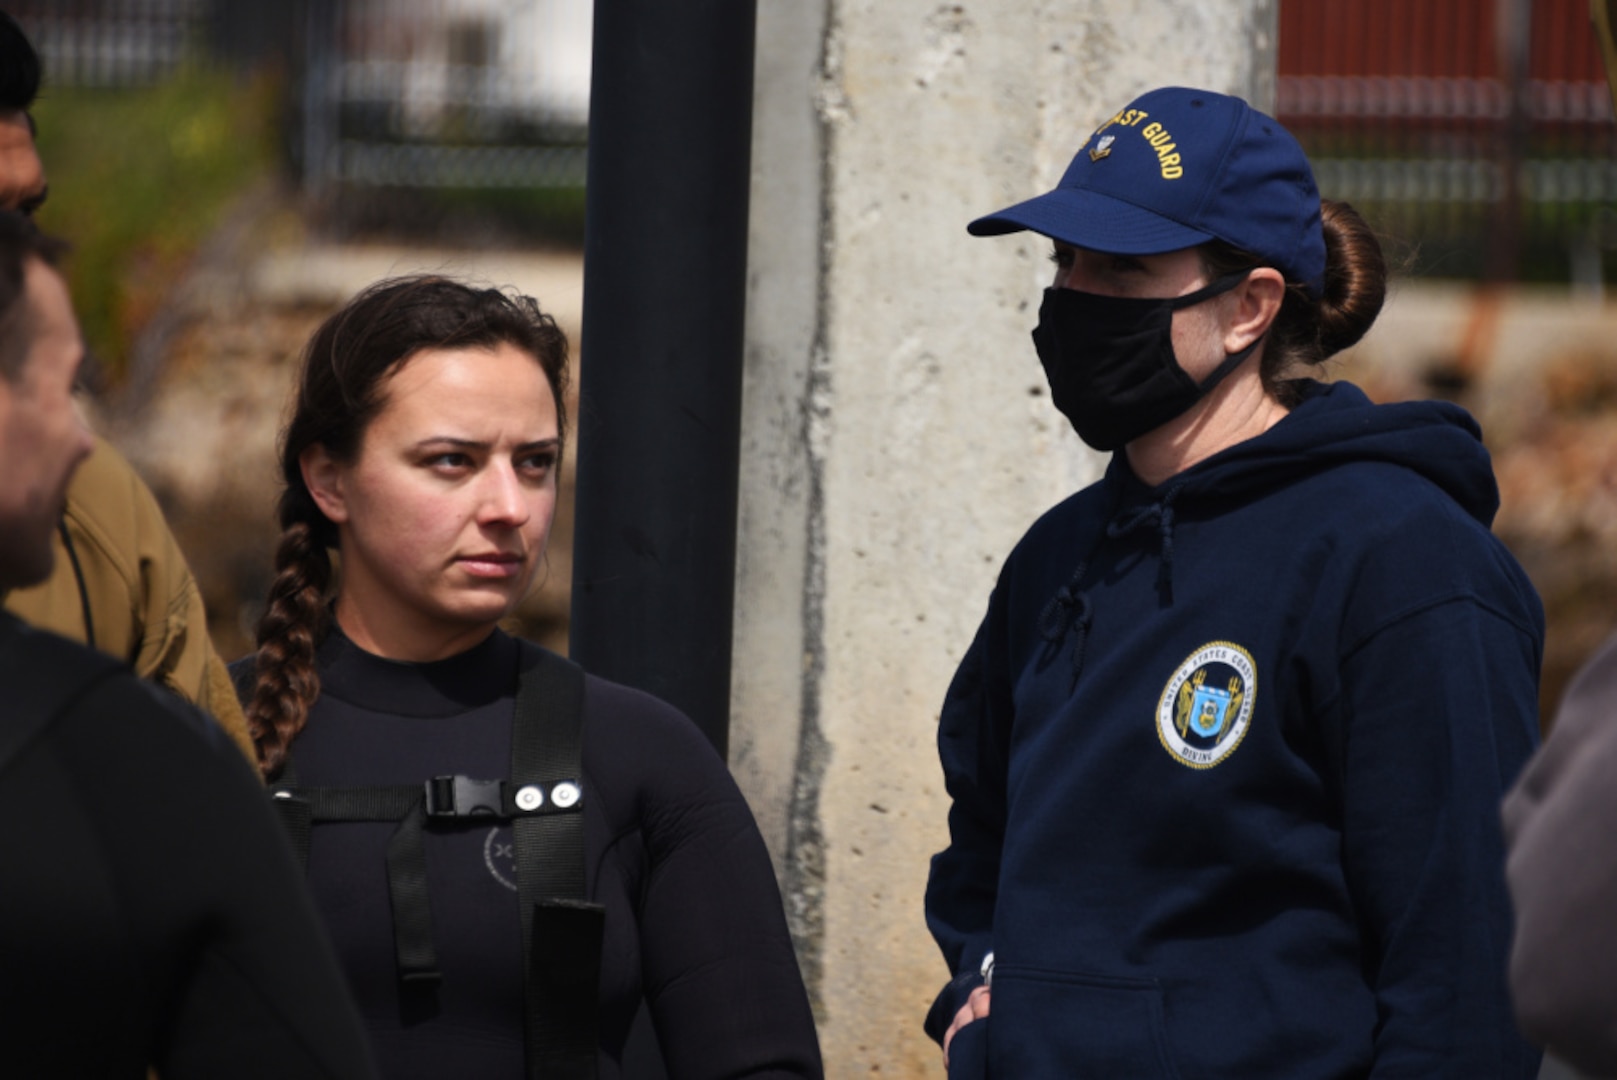 Petty Officer 2nd Class Monique Gilbreath and Petty Officer 2nd Class Kristen Allen prepare to take part in a diving exercise at Coast Guard Sector San Diego, March 25, 2021. Gilbreath and Allen are the only two active female divers in the Coast Guard. (U.S. Coast Guard photo by Petty Officer 3rd Class Alex Gray)